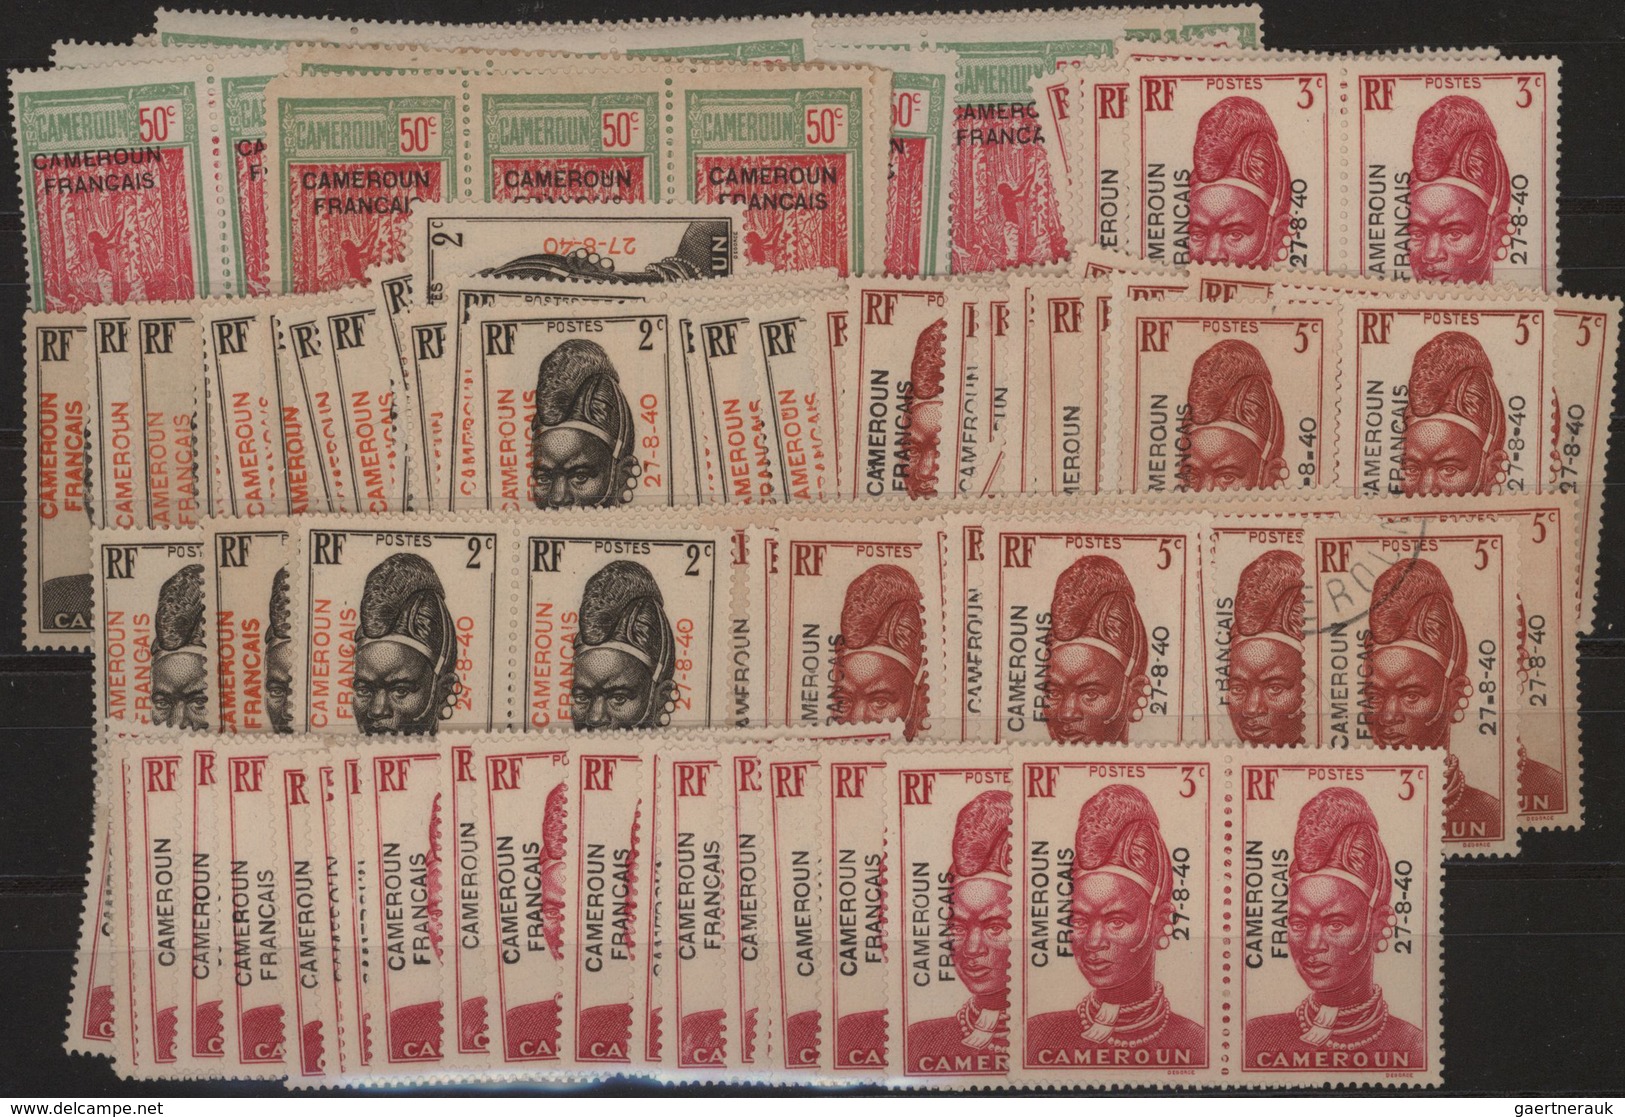 Kamerun: 1940, Yvert 202, 208-212 And 222 Overprint Issues: Approximately 600 Stamps Mainly Unused, - Kamerun (1960-...)